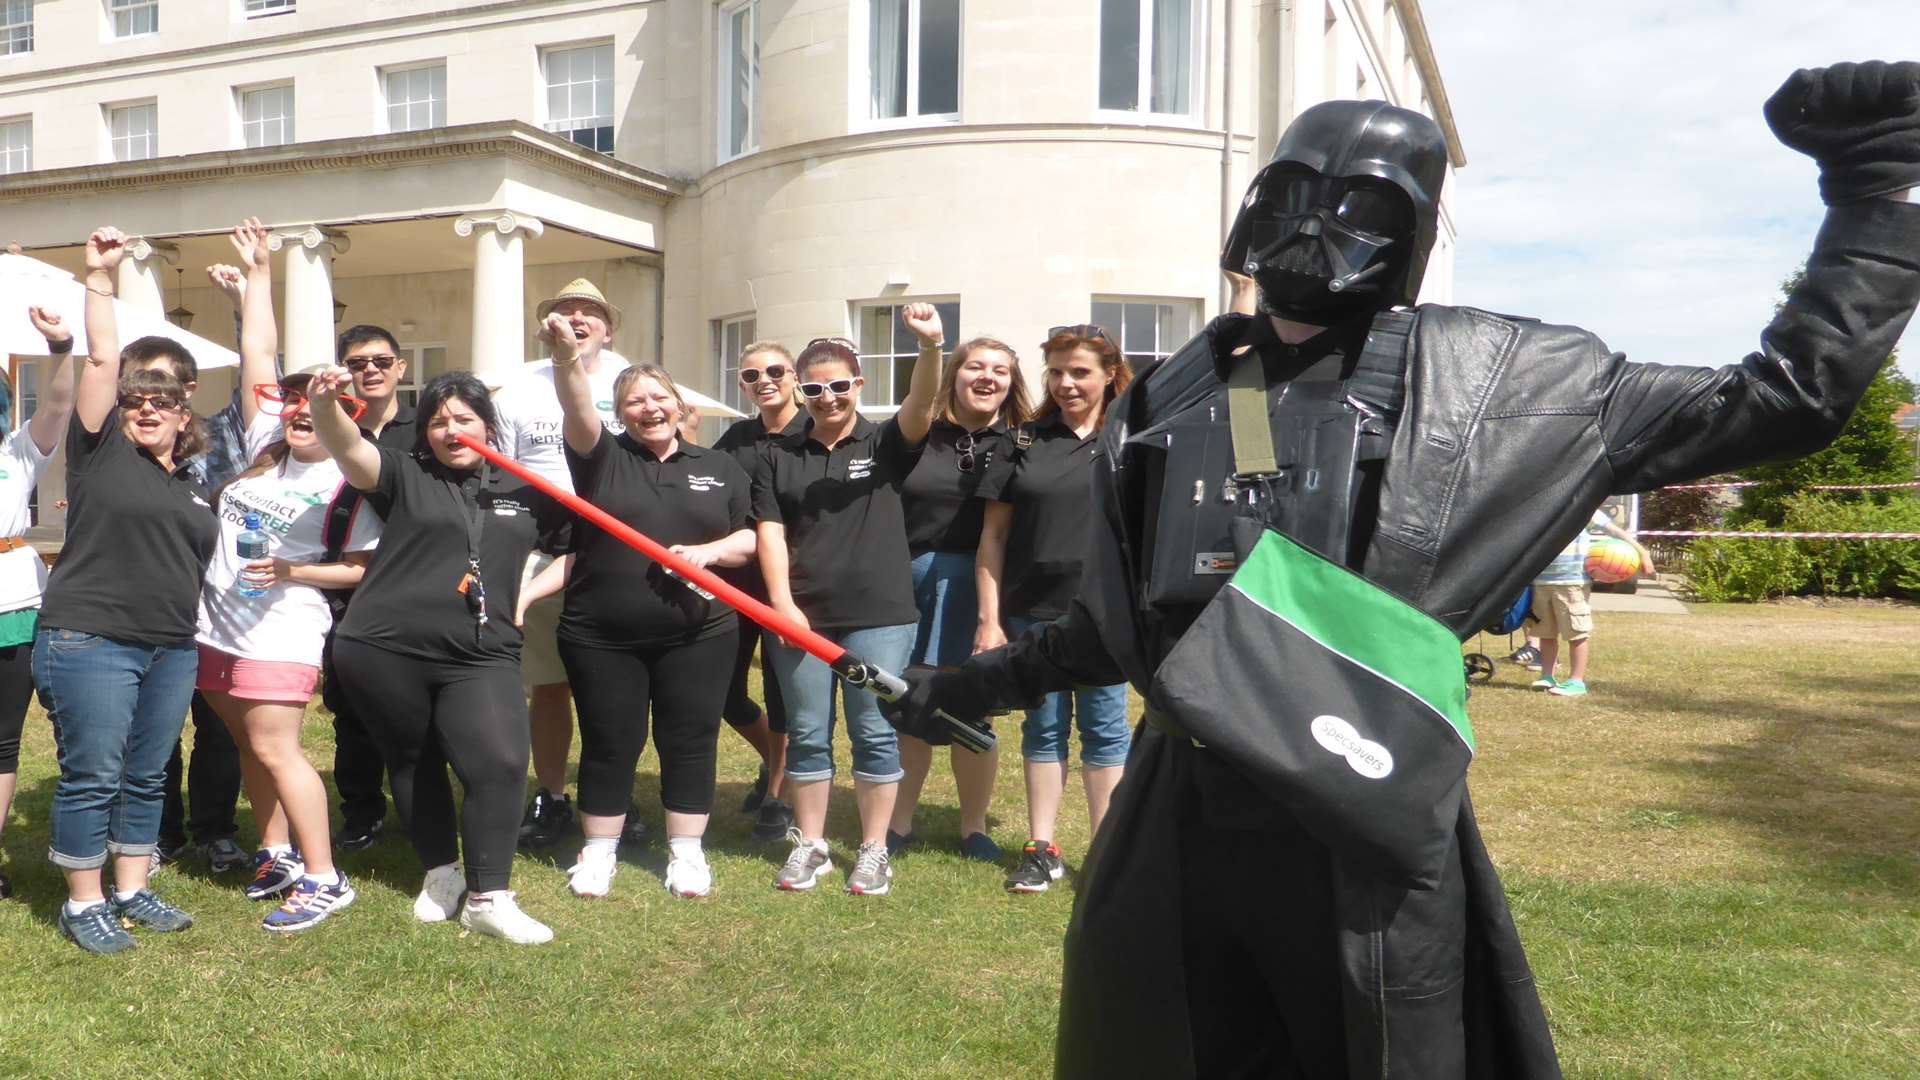 Darth Vader and his Stormtroopers from Margate and Ramsgate branches of Specsavers taking on the 2015 KM Charity Walk. Booking is now open for the 21st anniversary event.